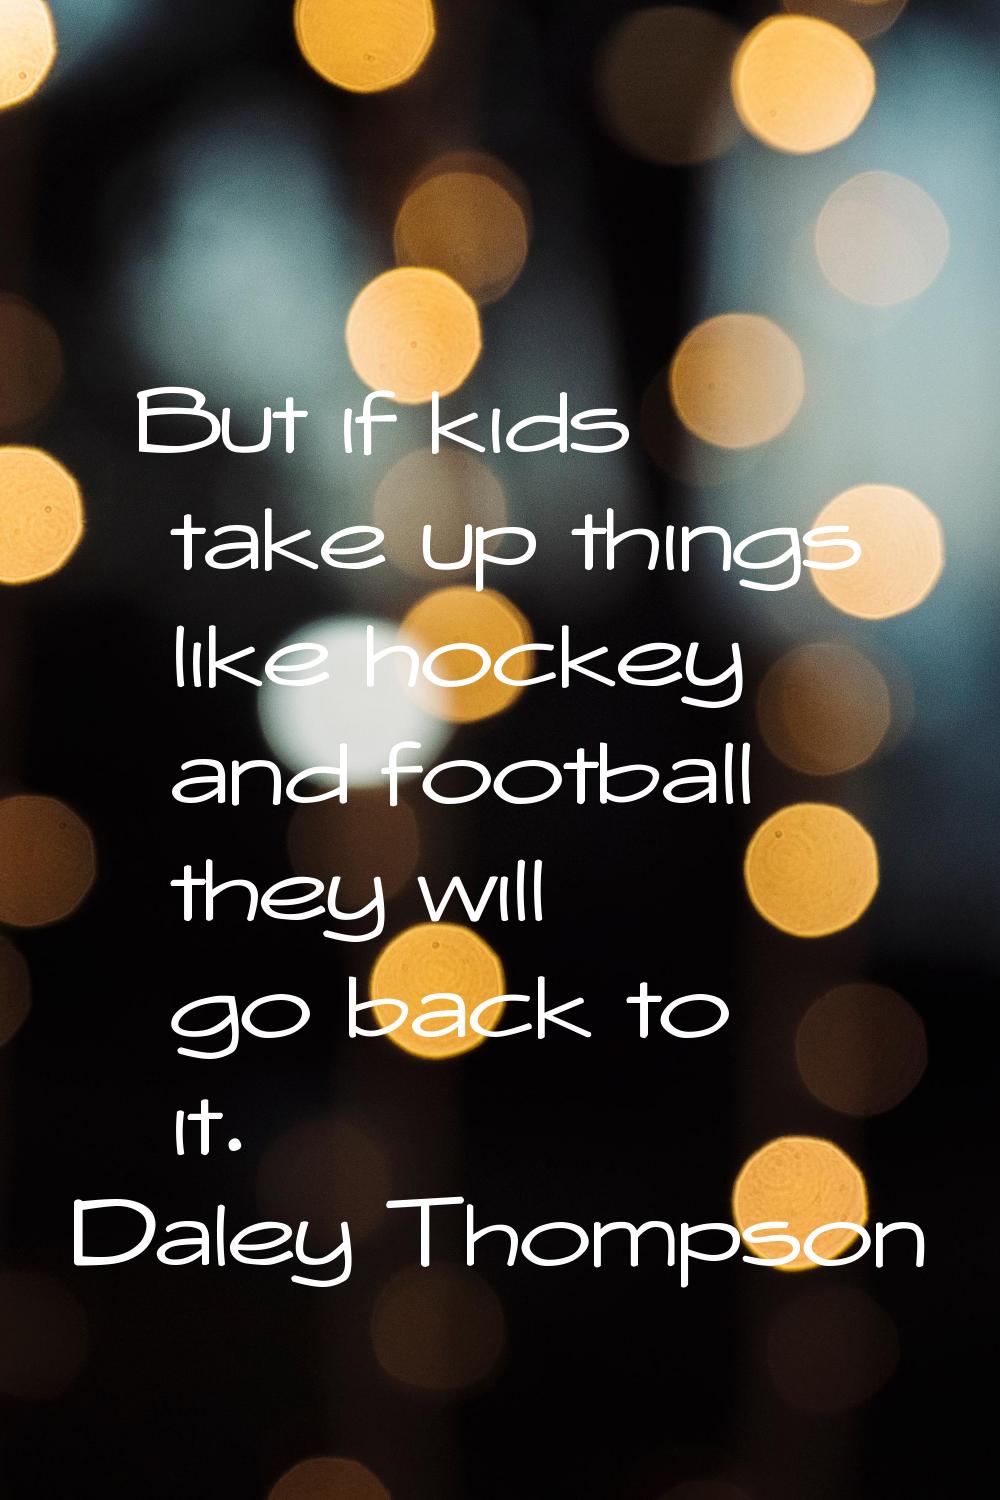 But if kids take up things like hockey and football they will go back to it.